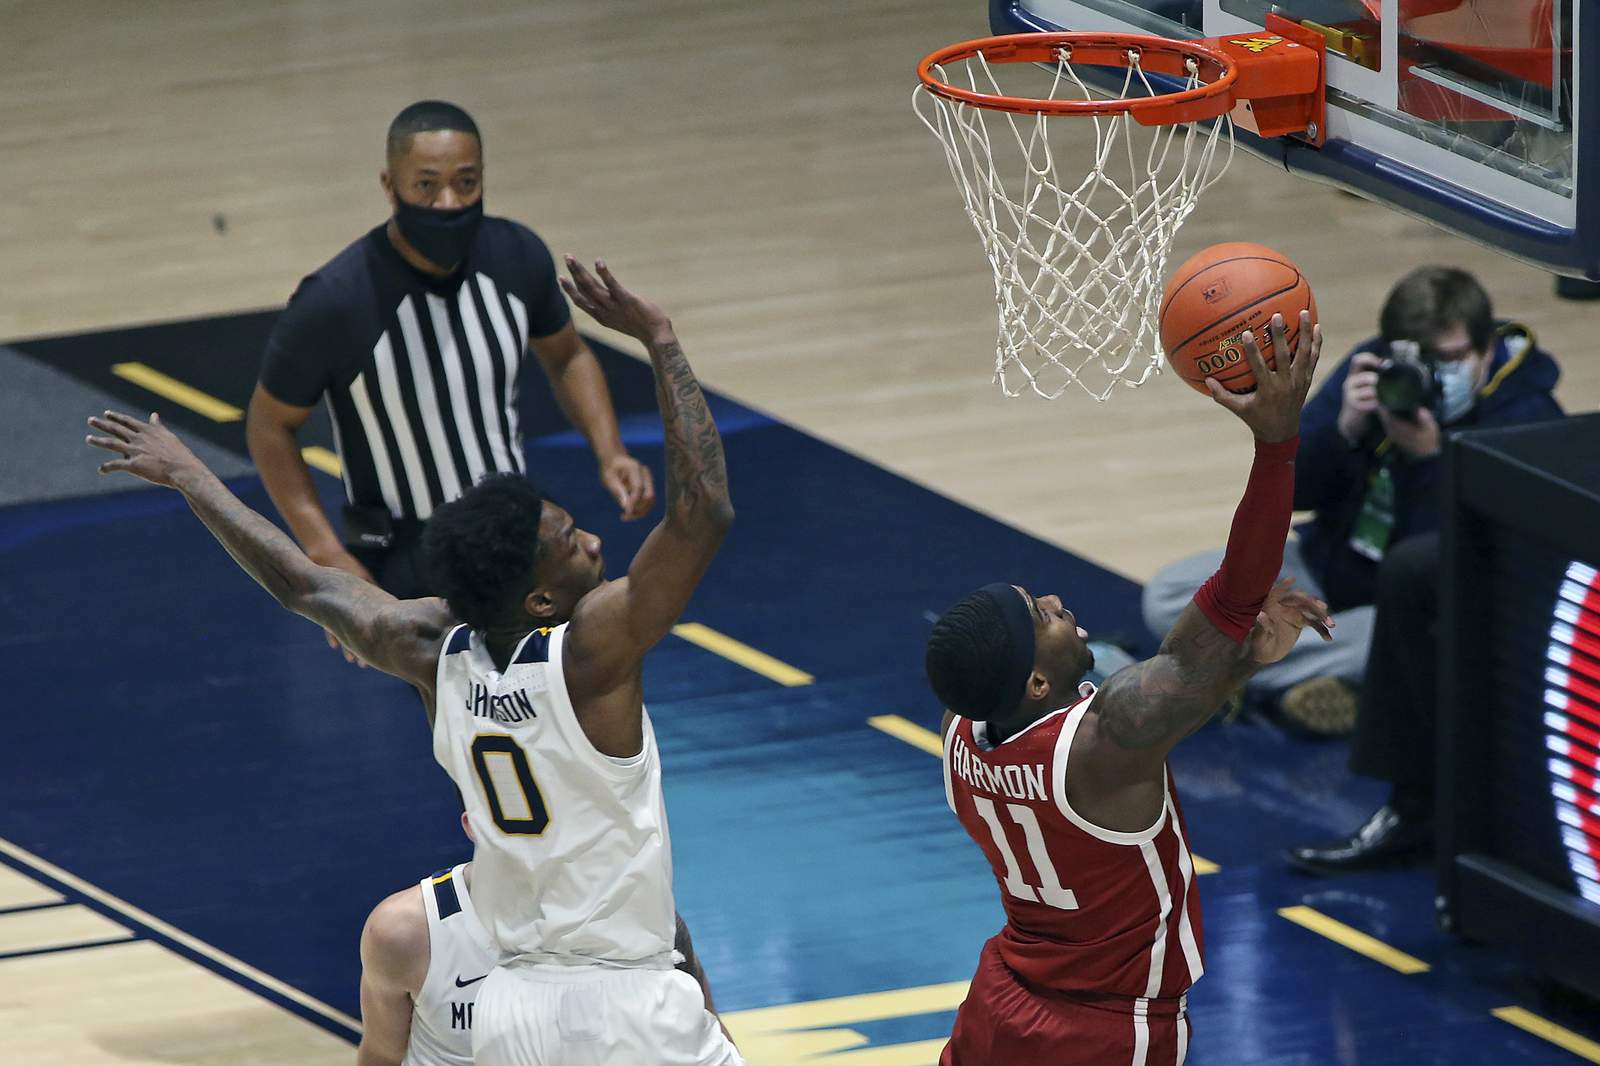 Reaves lifts No. 12 Oklahoma over No. 14 WVU 91-90 in 2OT